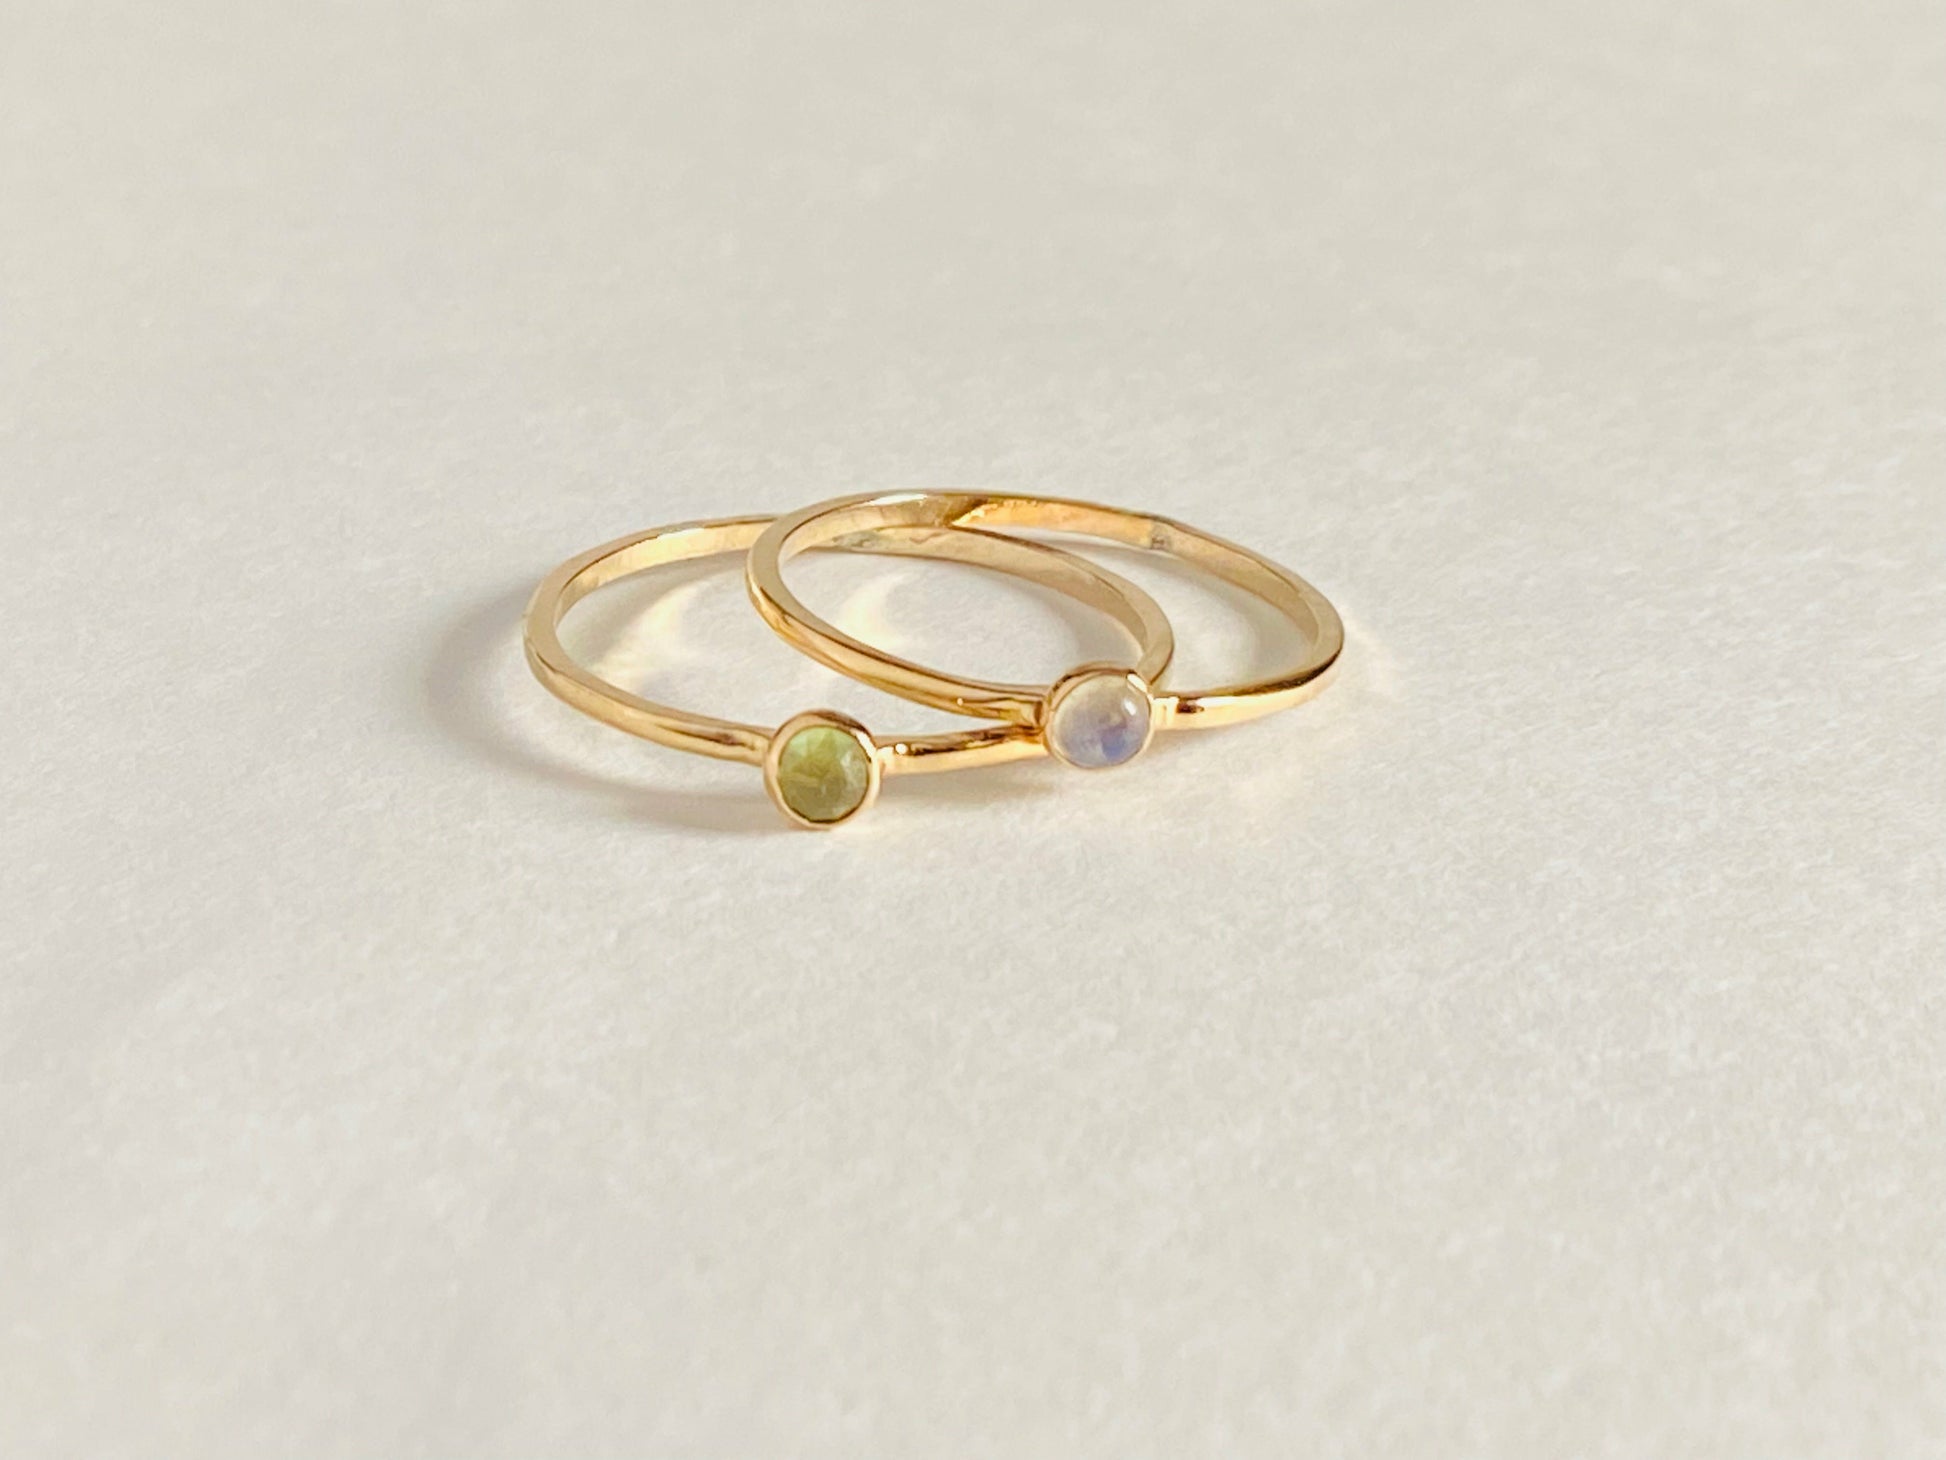 Small stackable gemstone rings, serrated bezel. Perfect for stacking, your choice of gemstone.